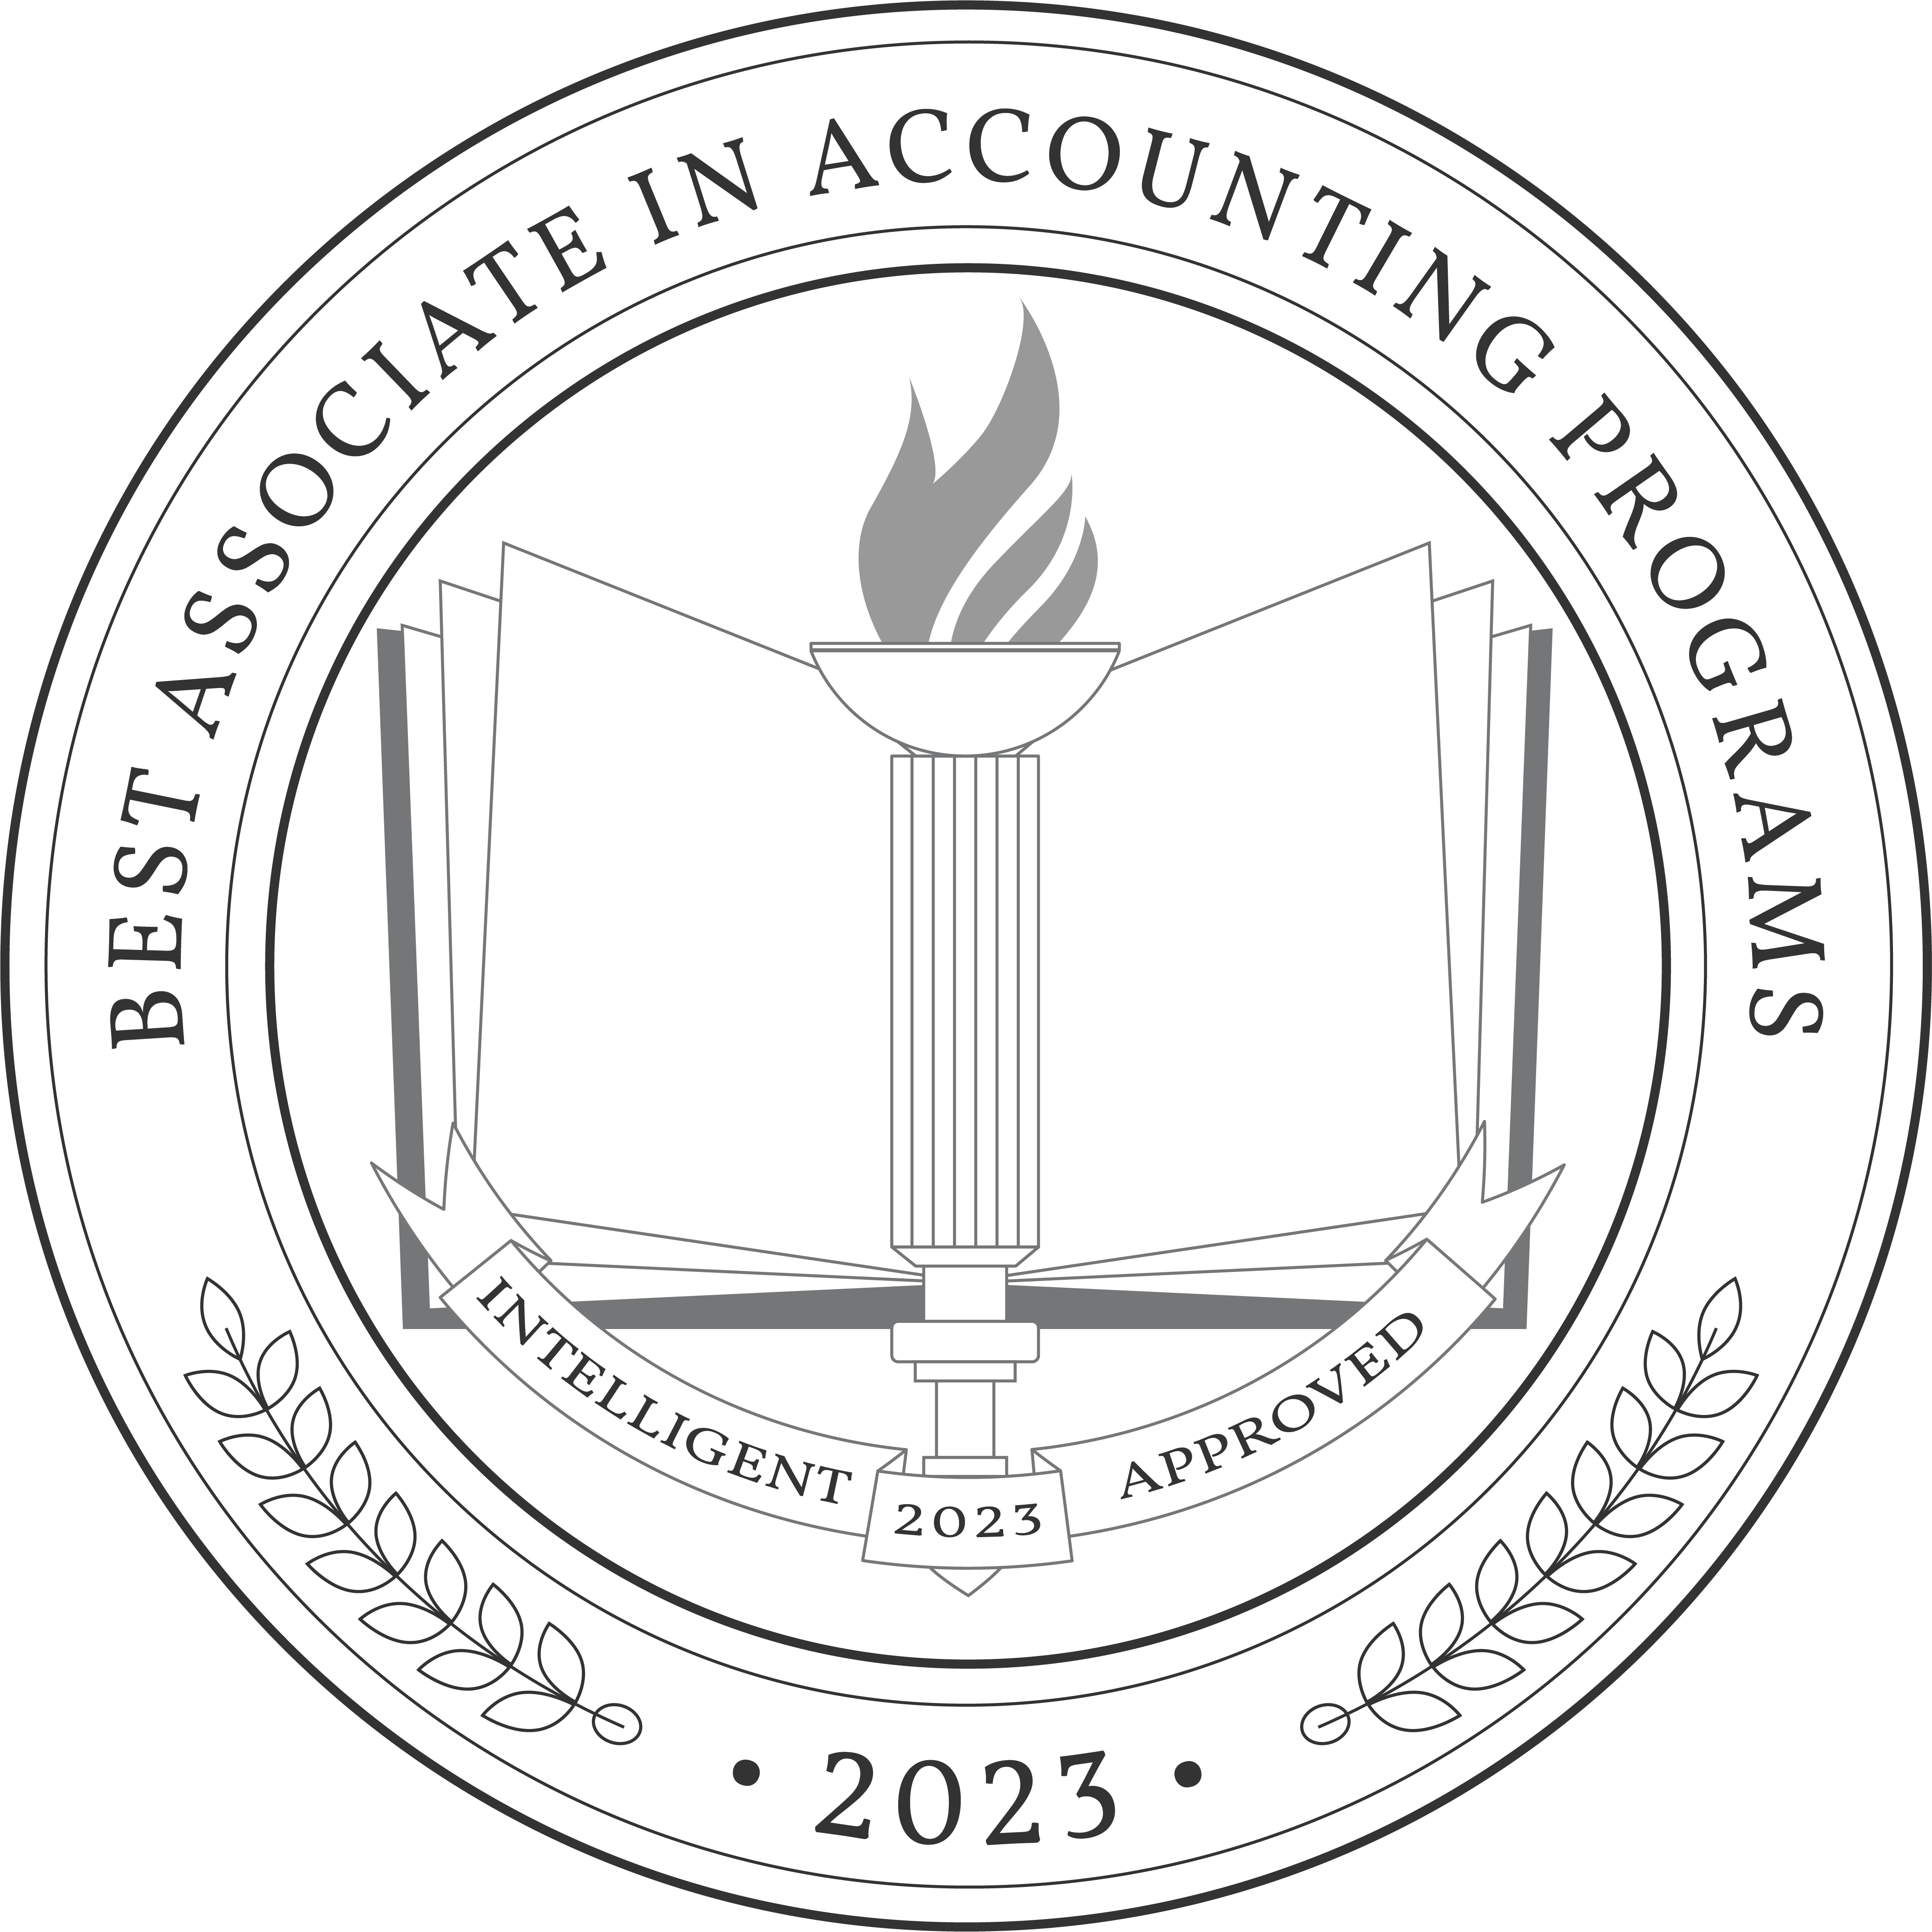 Best Associate in Accounting Programs 2023